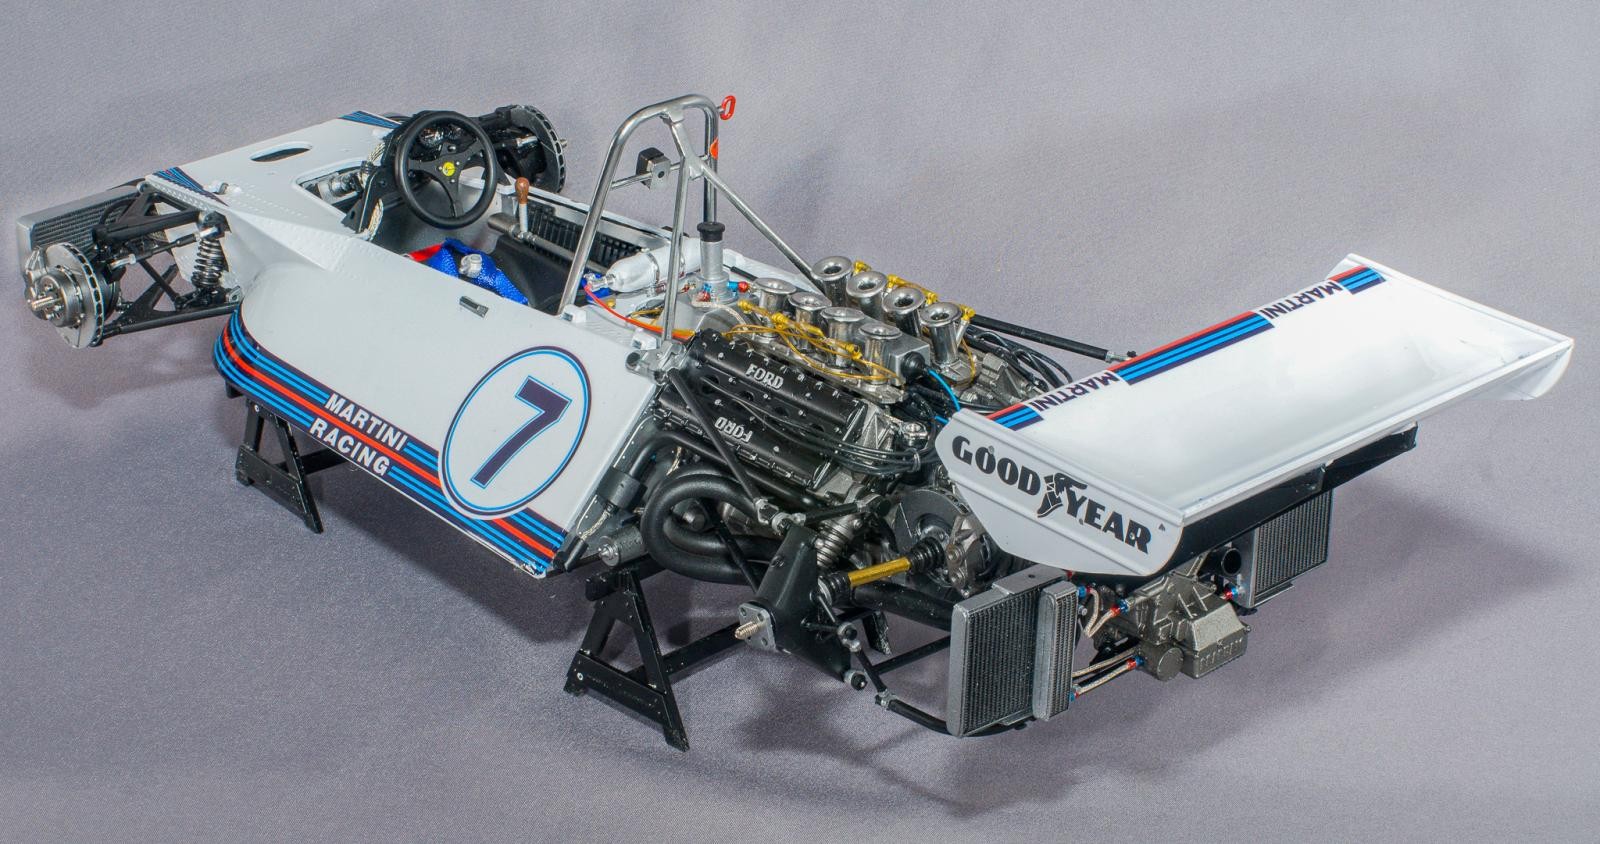 The Hobbyman - The revolutionary Brabham BT44B has been re-released from  Tamiya with the addition of photoetched parts and quality decals printed by  Cartograf of Italy. Available online